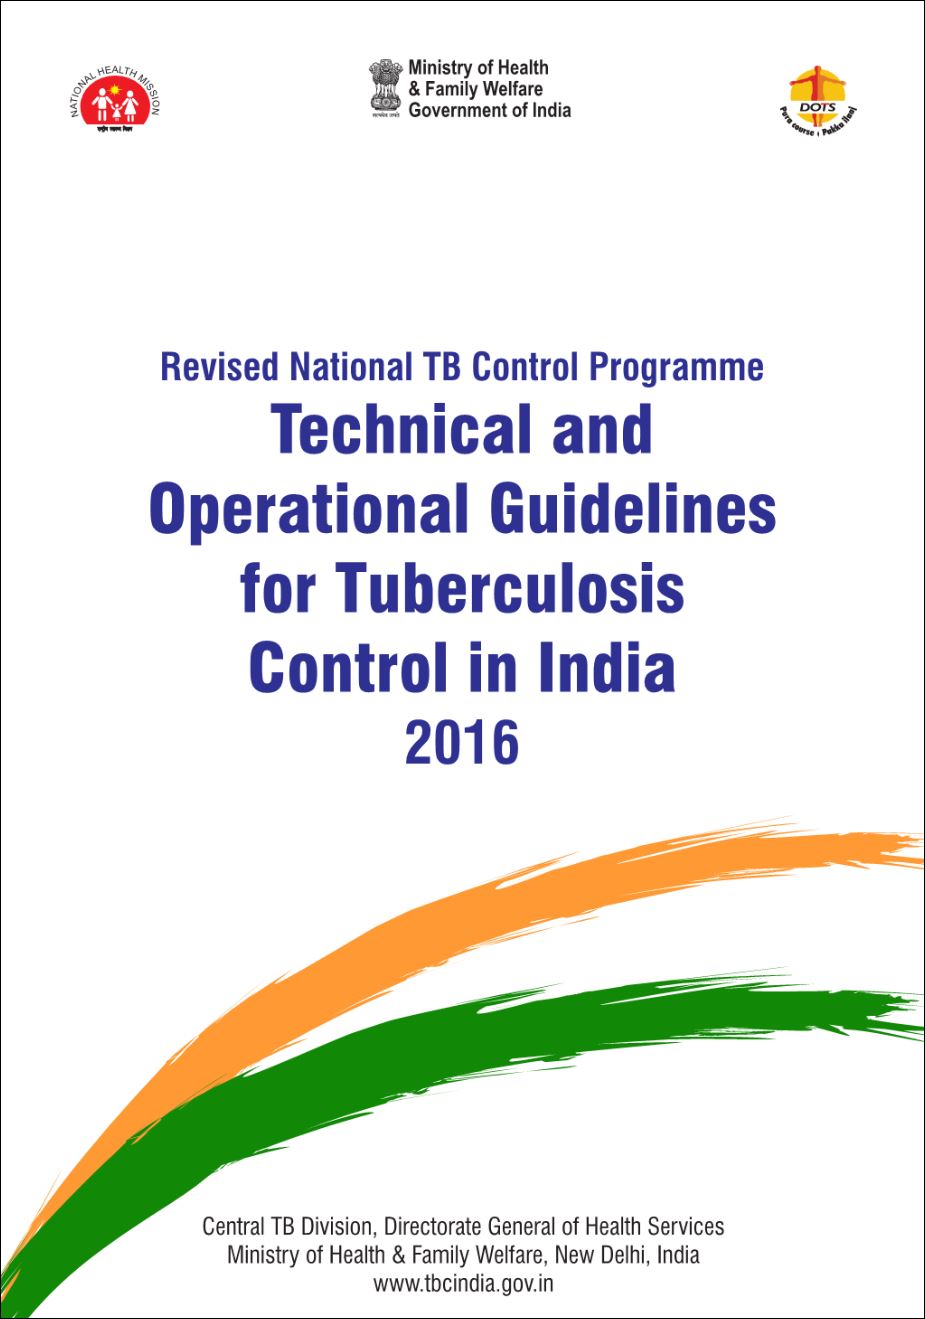 Revised National TB Control Programme Technical and Operational Guidelines for Tuberculosis Control in India 2016